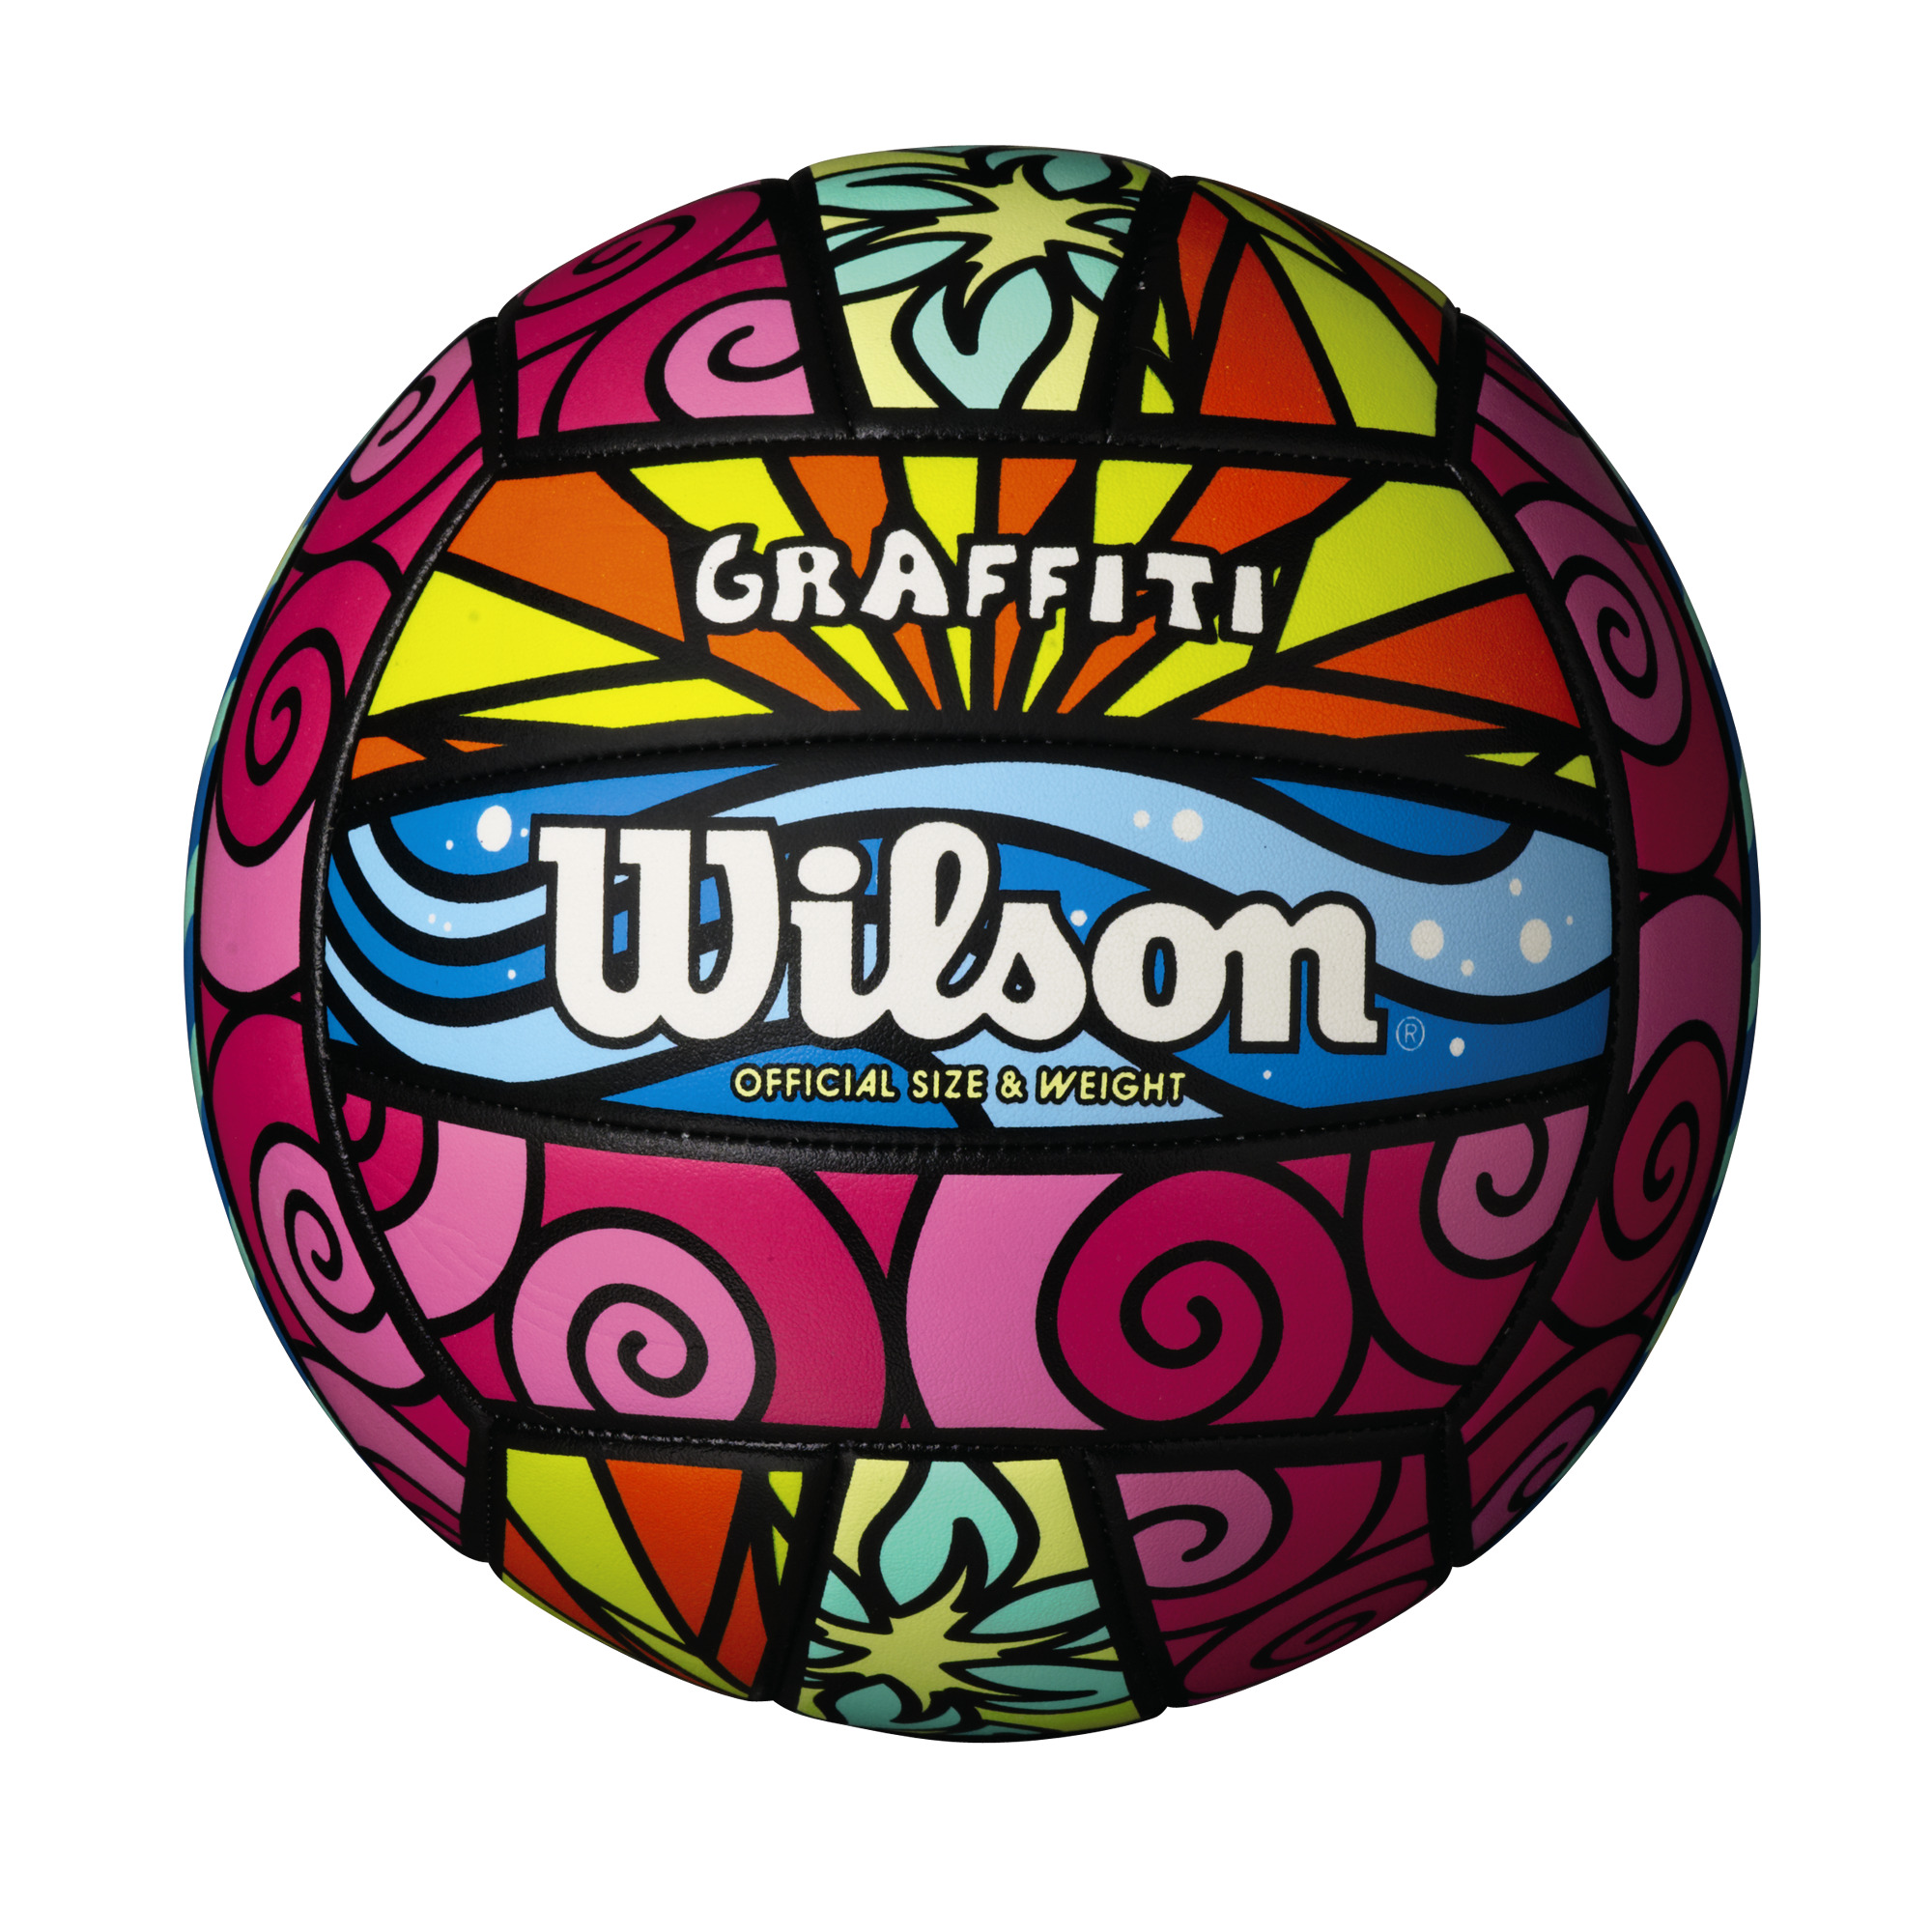 Wilson Graffiti Outdoor Volleyball, Official Size - image 1 of 7